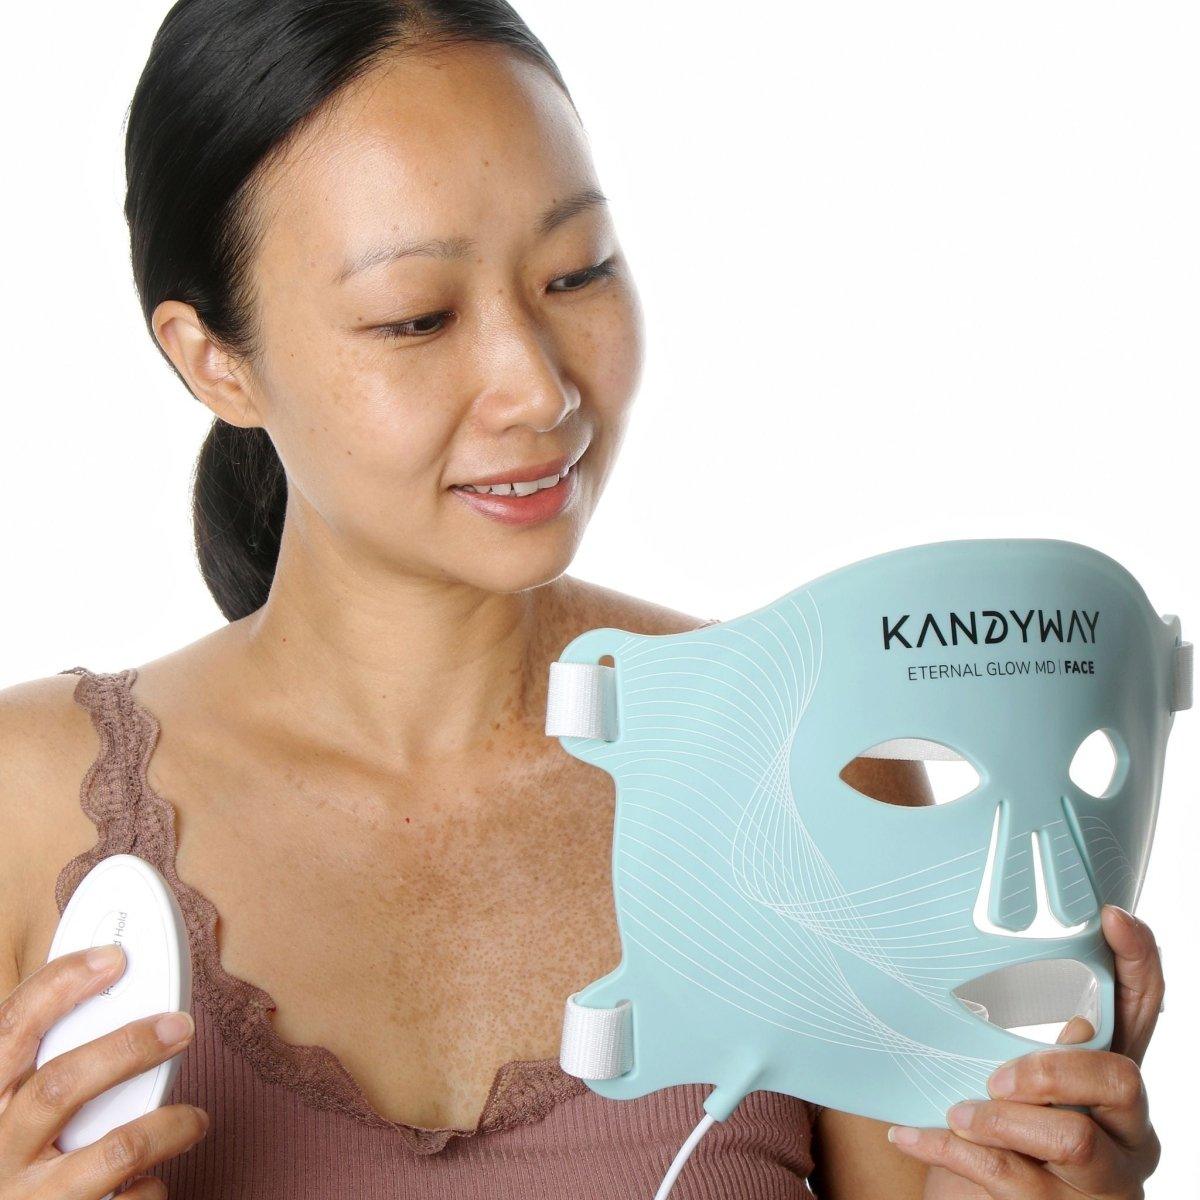 Kandyway Eternal Glow - Red Light Therapy Mask - Kandyway